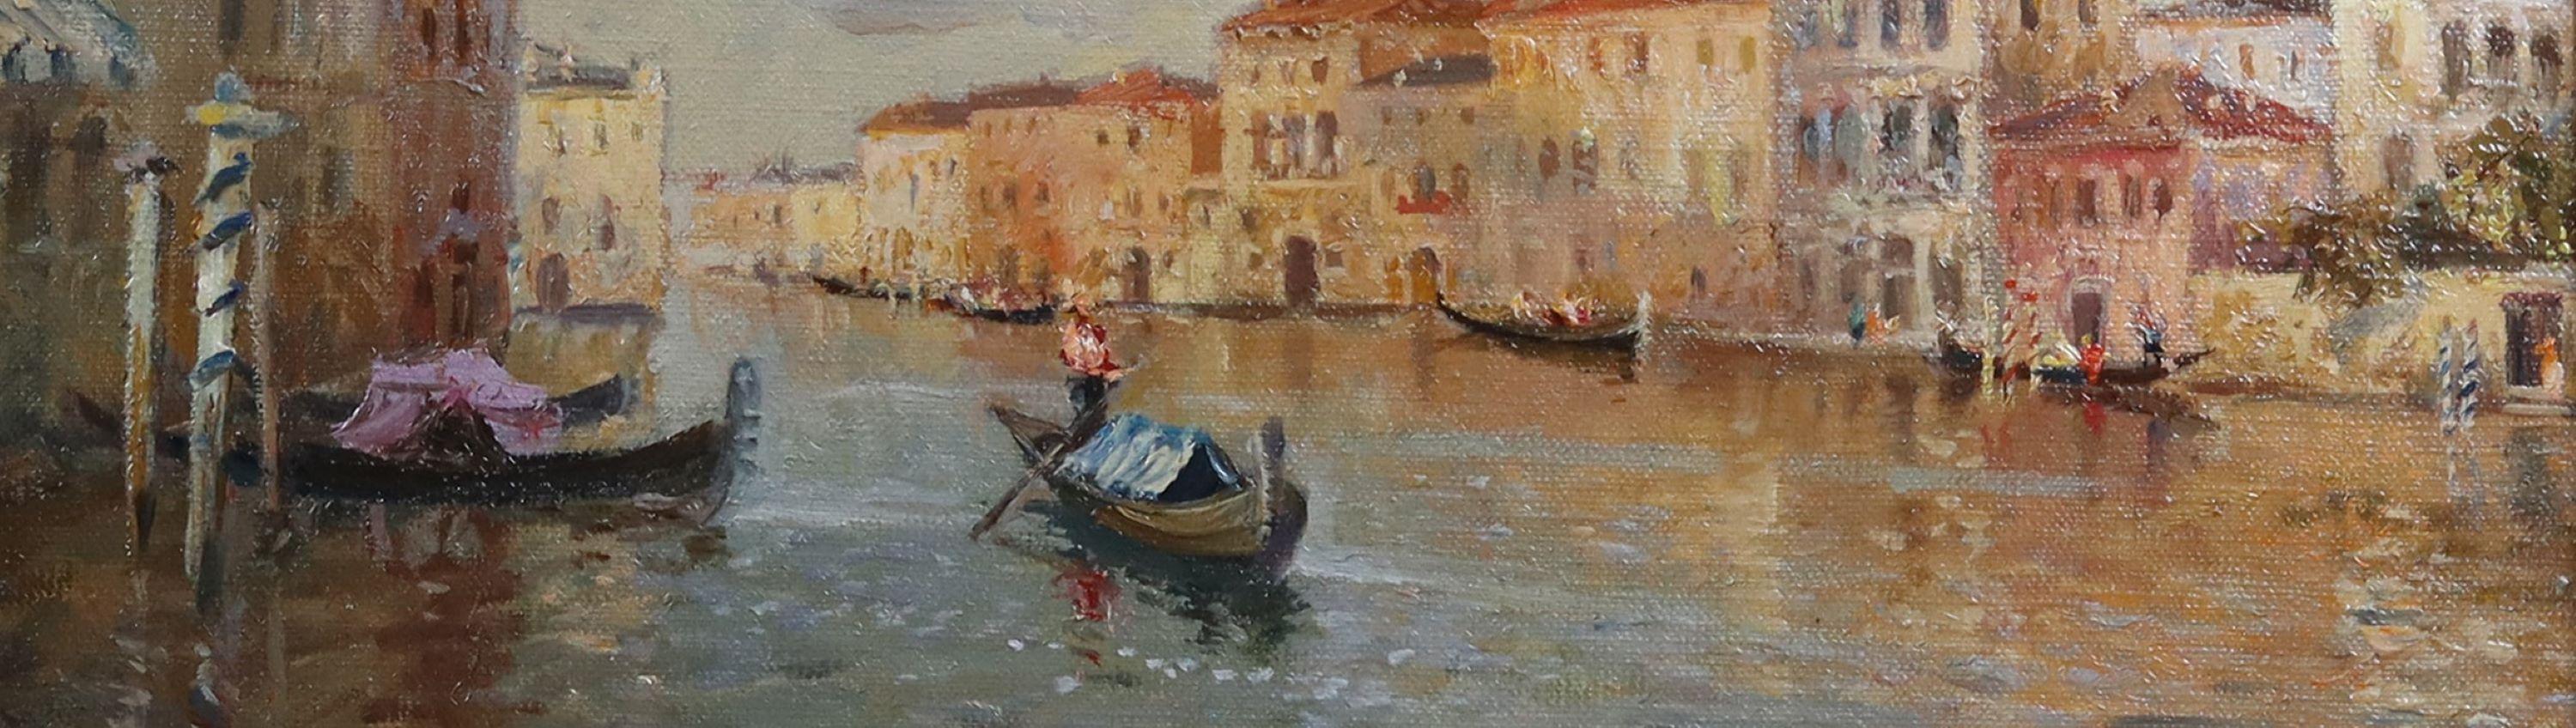 Yakov Besperstov
(1929-1989)
A Venetian Canal Scene
Oil on canvas: 13 x 18in. Frame: 18 x 23 in. Circa 1970’s
Yakov Tarasovich Besperstov was a Soviet painter who lived and did much of his work in the city known then as Leningrad, now Saint